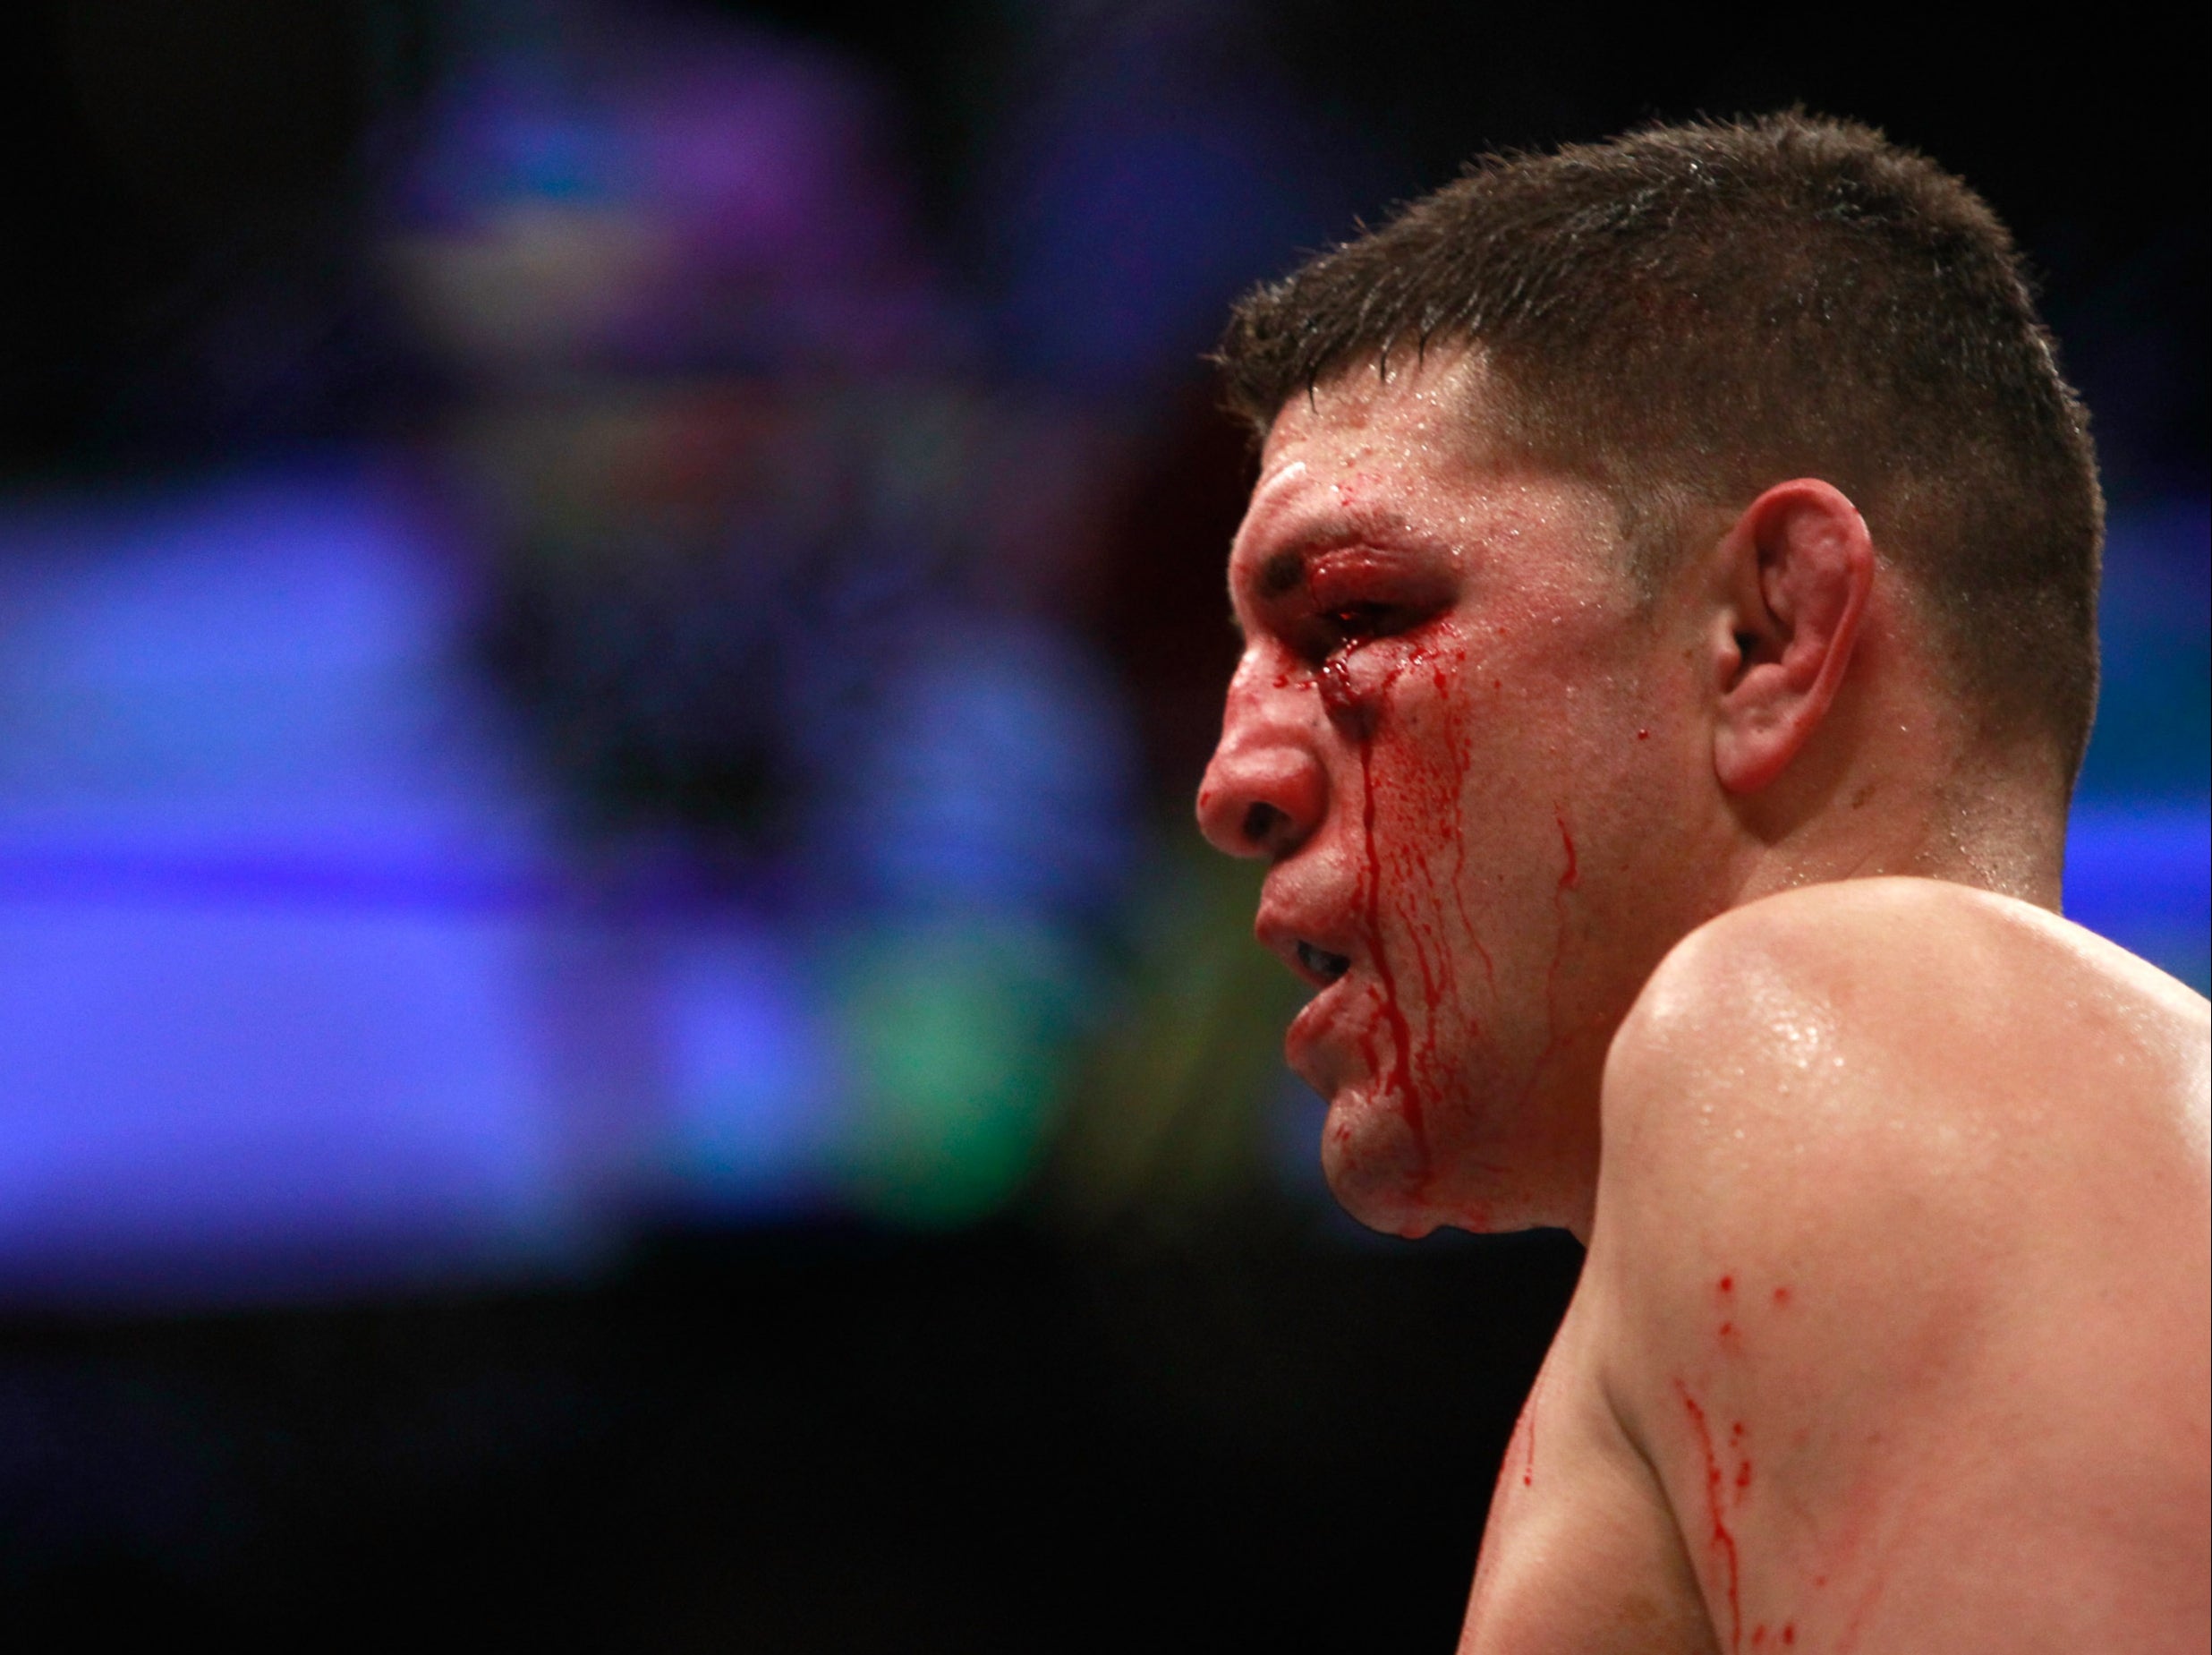 Nick Diaz during his last bout, against Anderson Silva in 2015